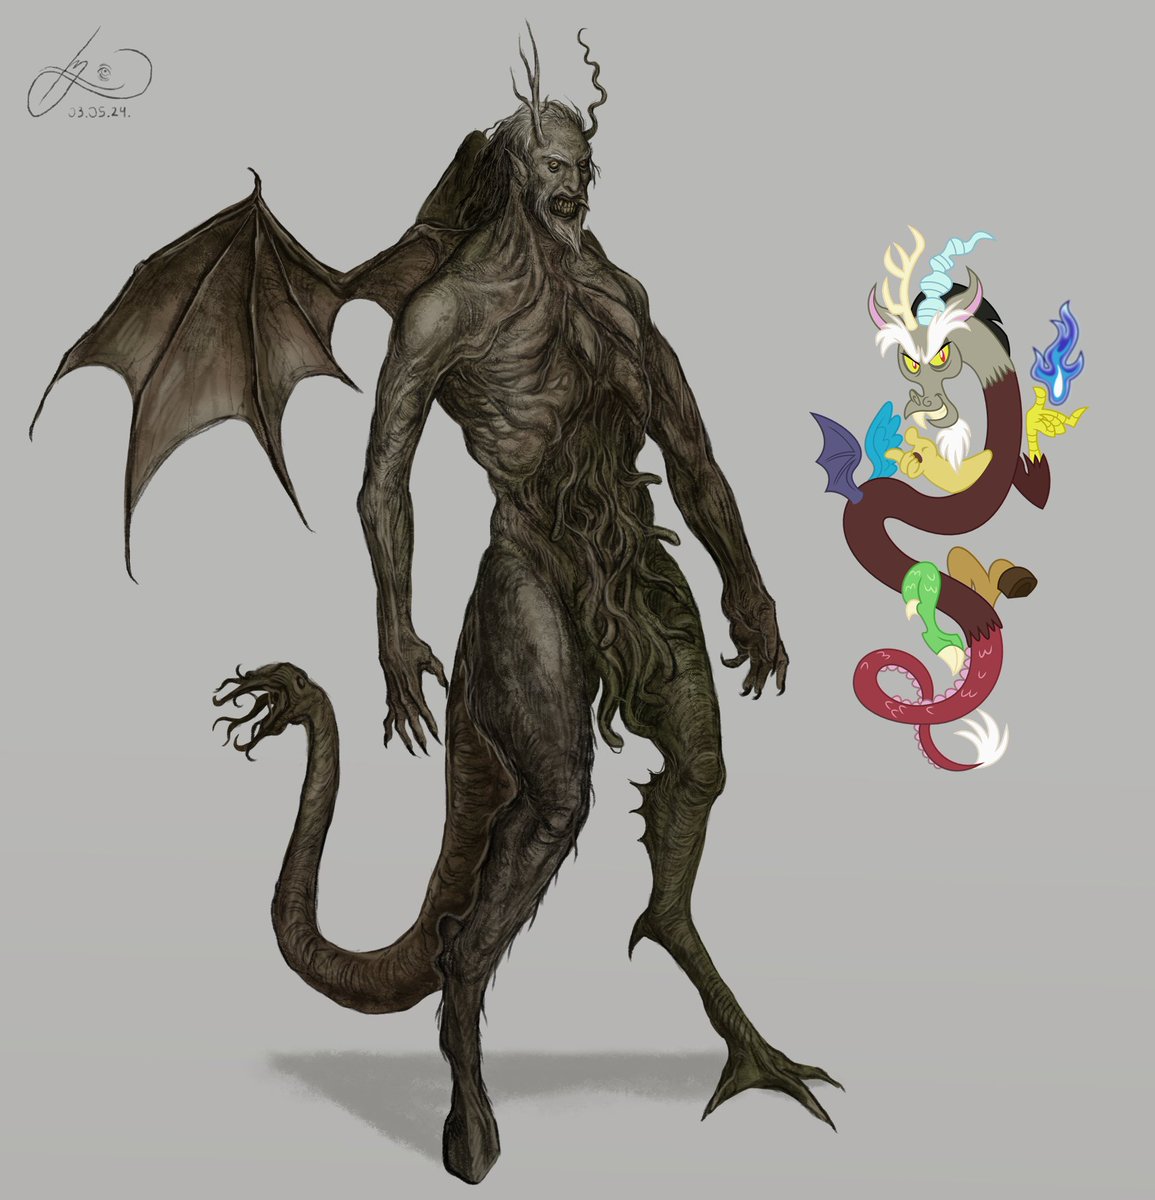 humanization of discord, but let's make it more correct

#horrorartist #horror #mlp #mylittlepony #discord